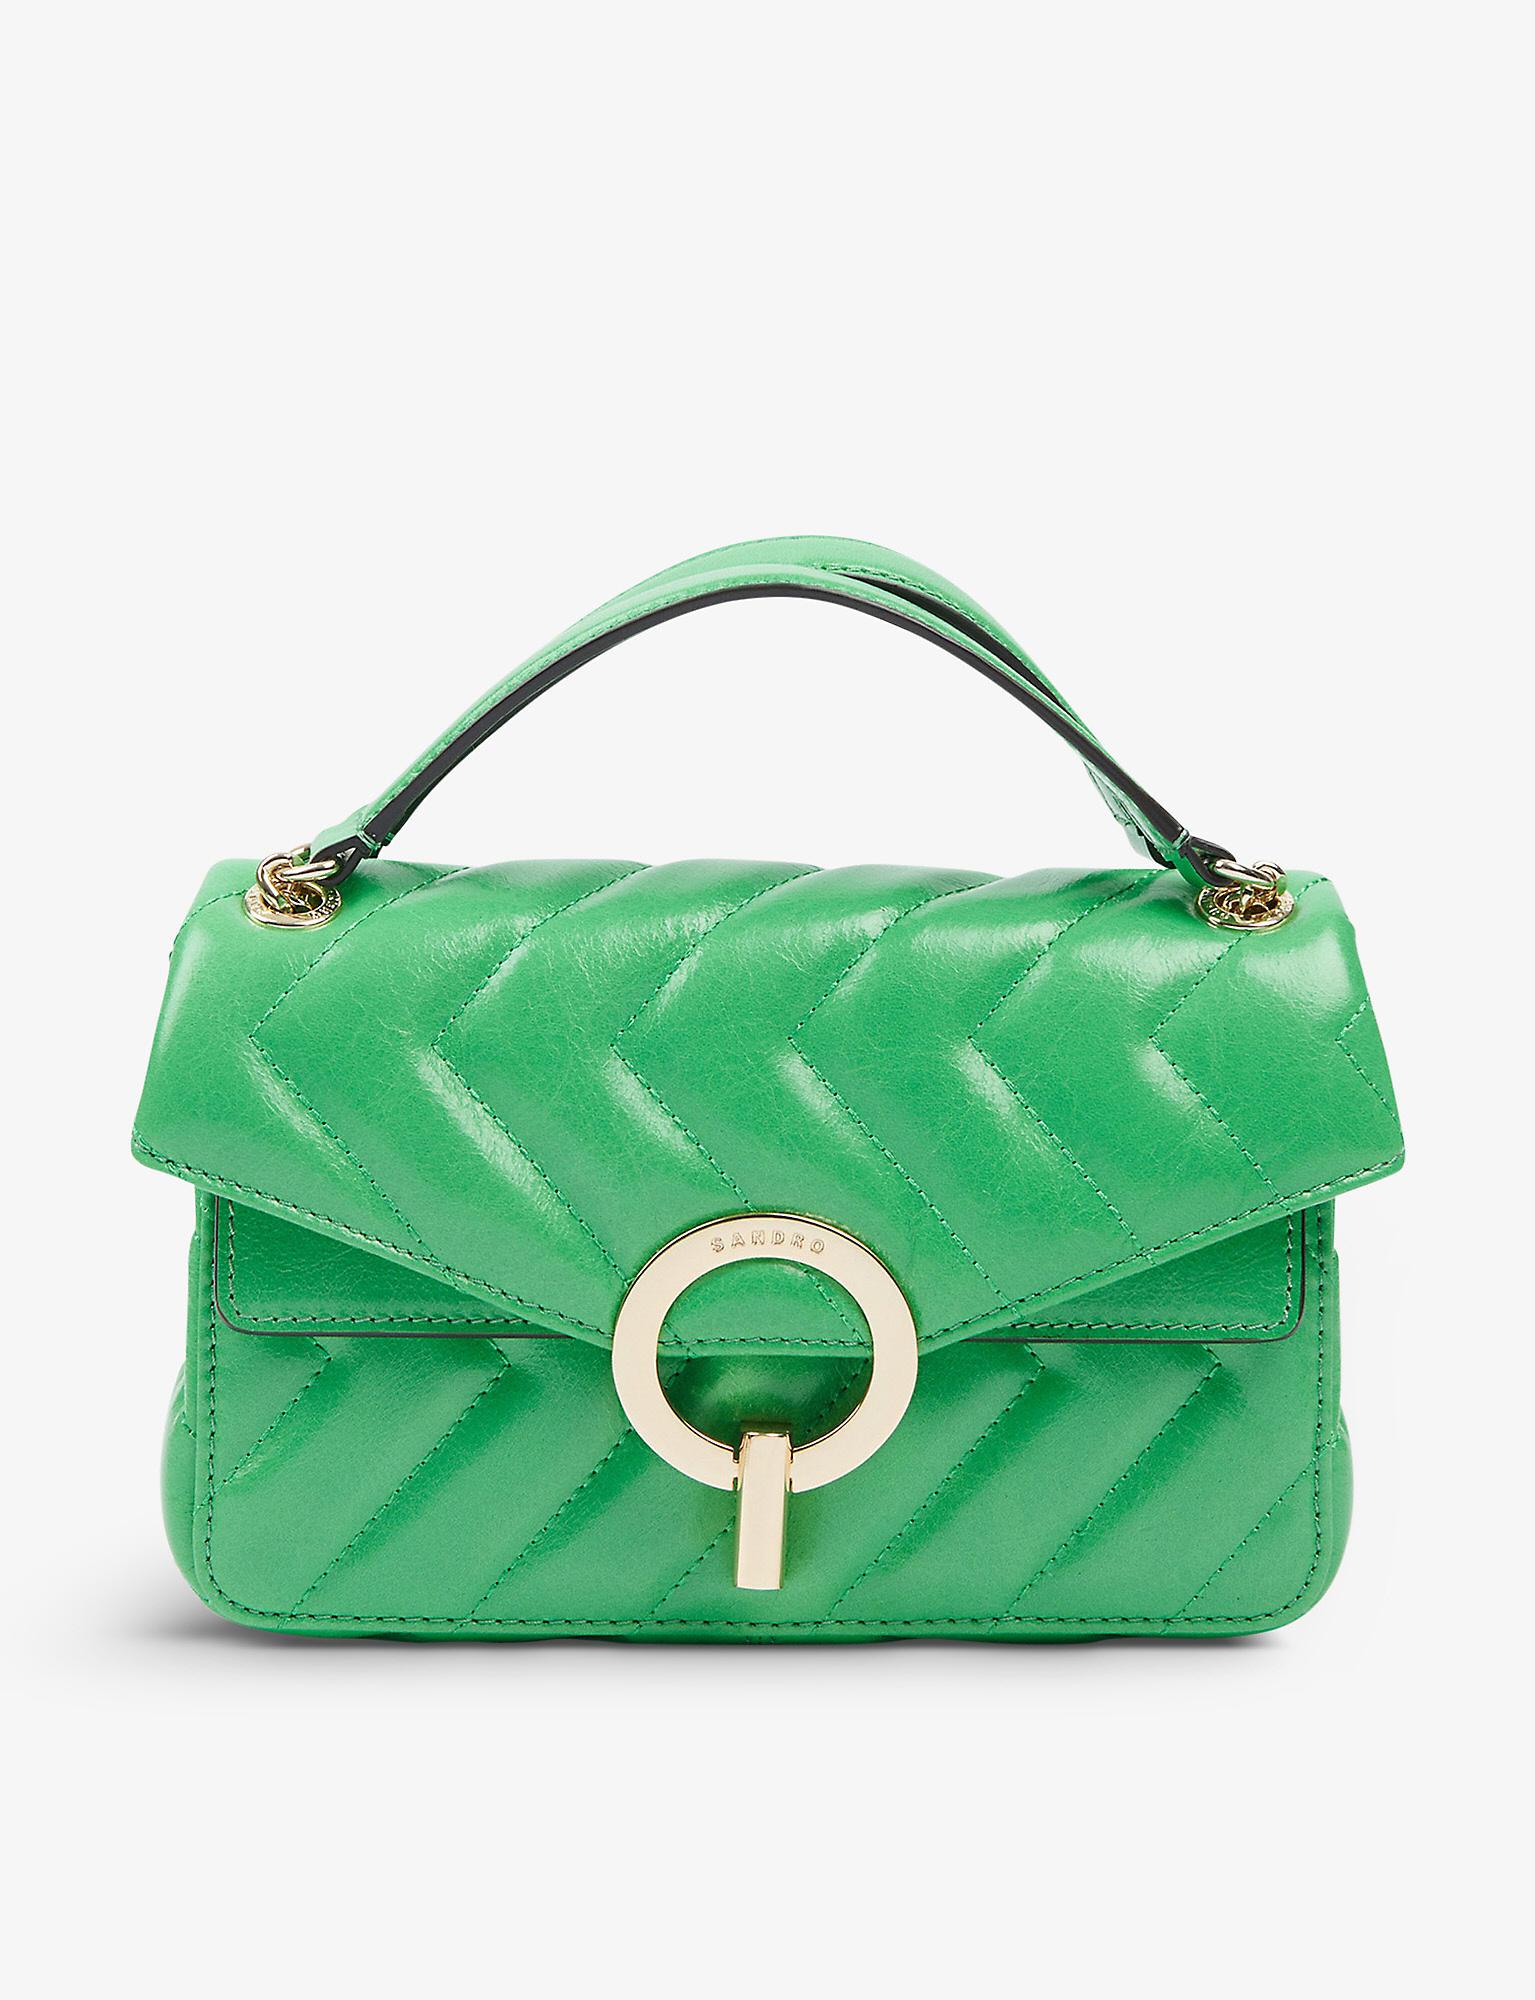 Sandro Yza Quilted Leather Shoulder Bag in Green | Lyst